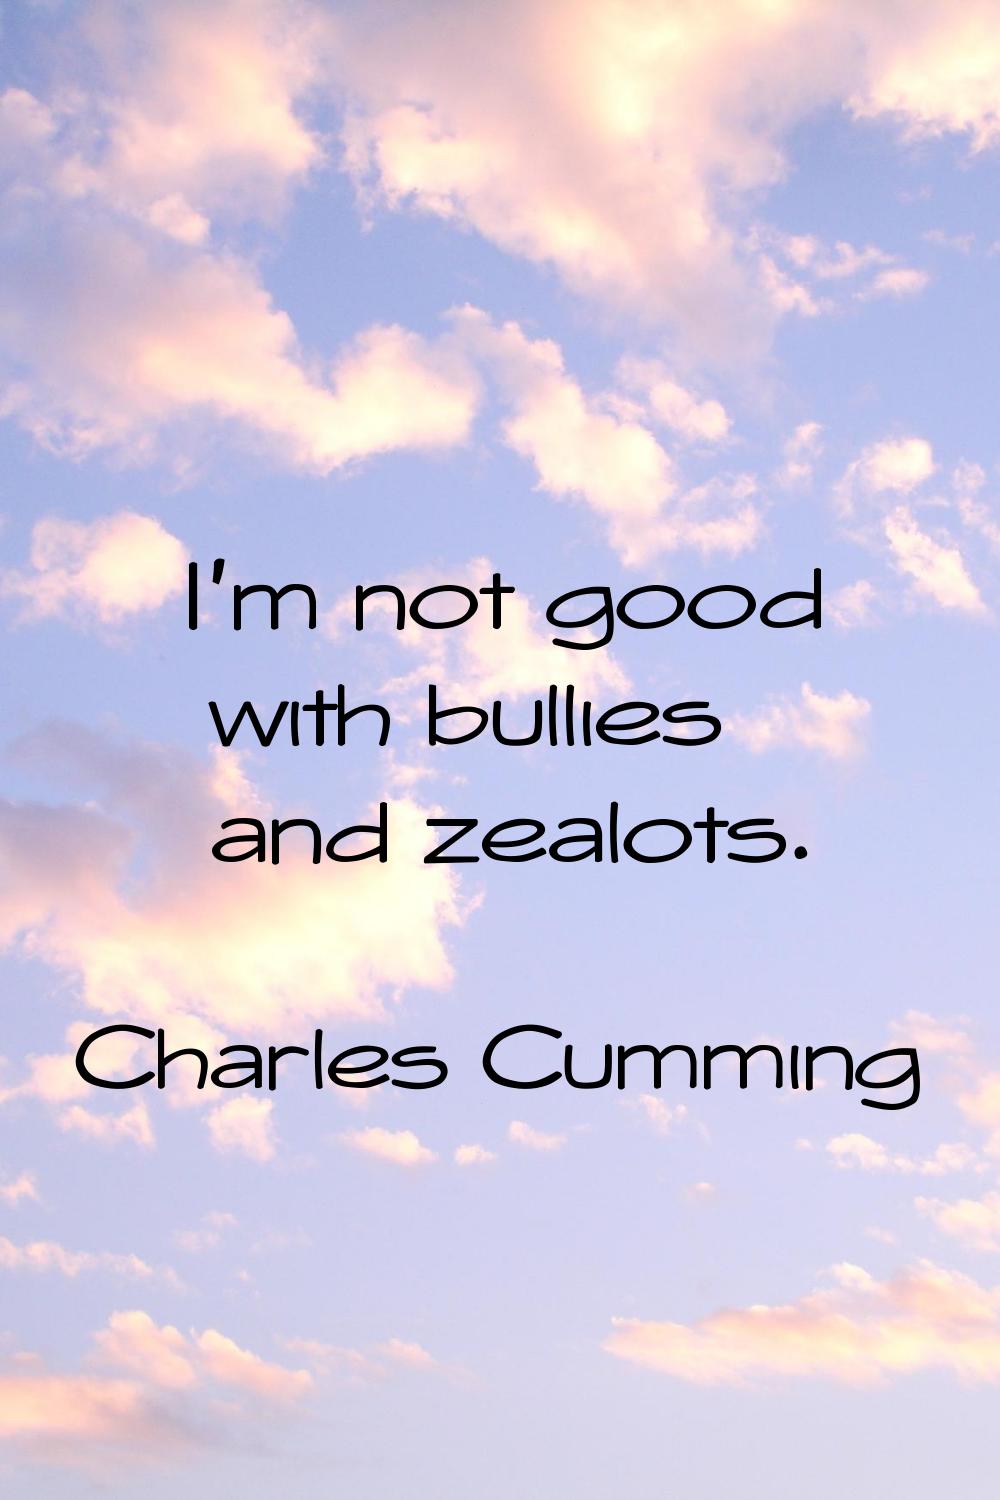 I'm not good with bullies and zealots.